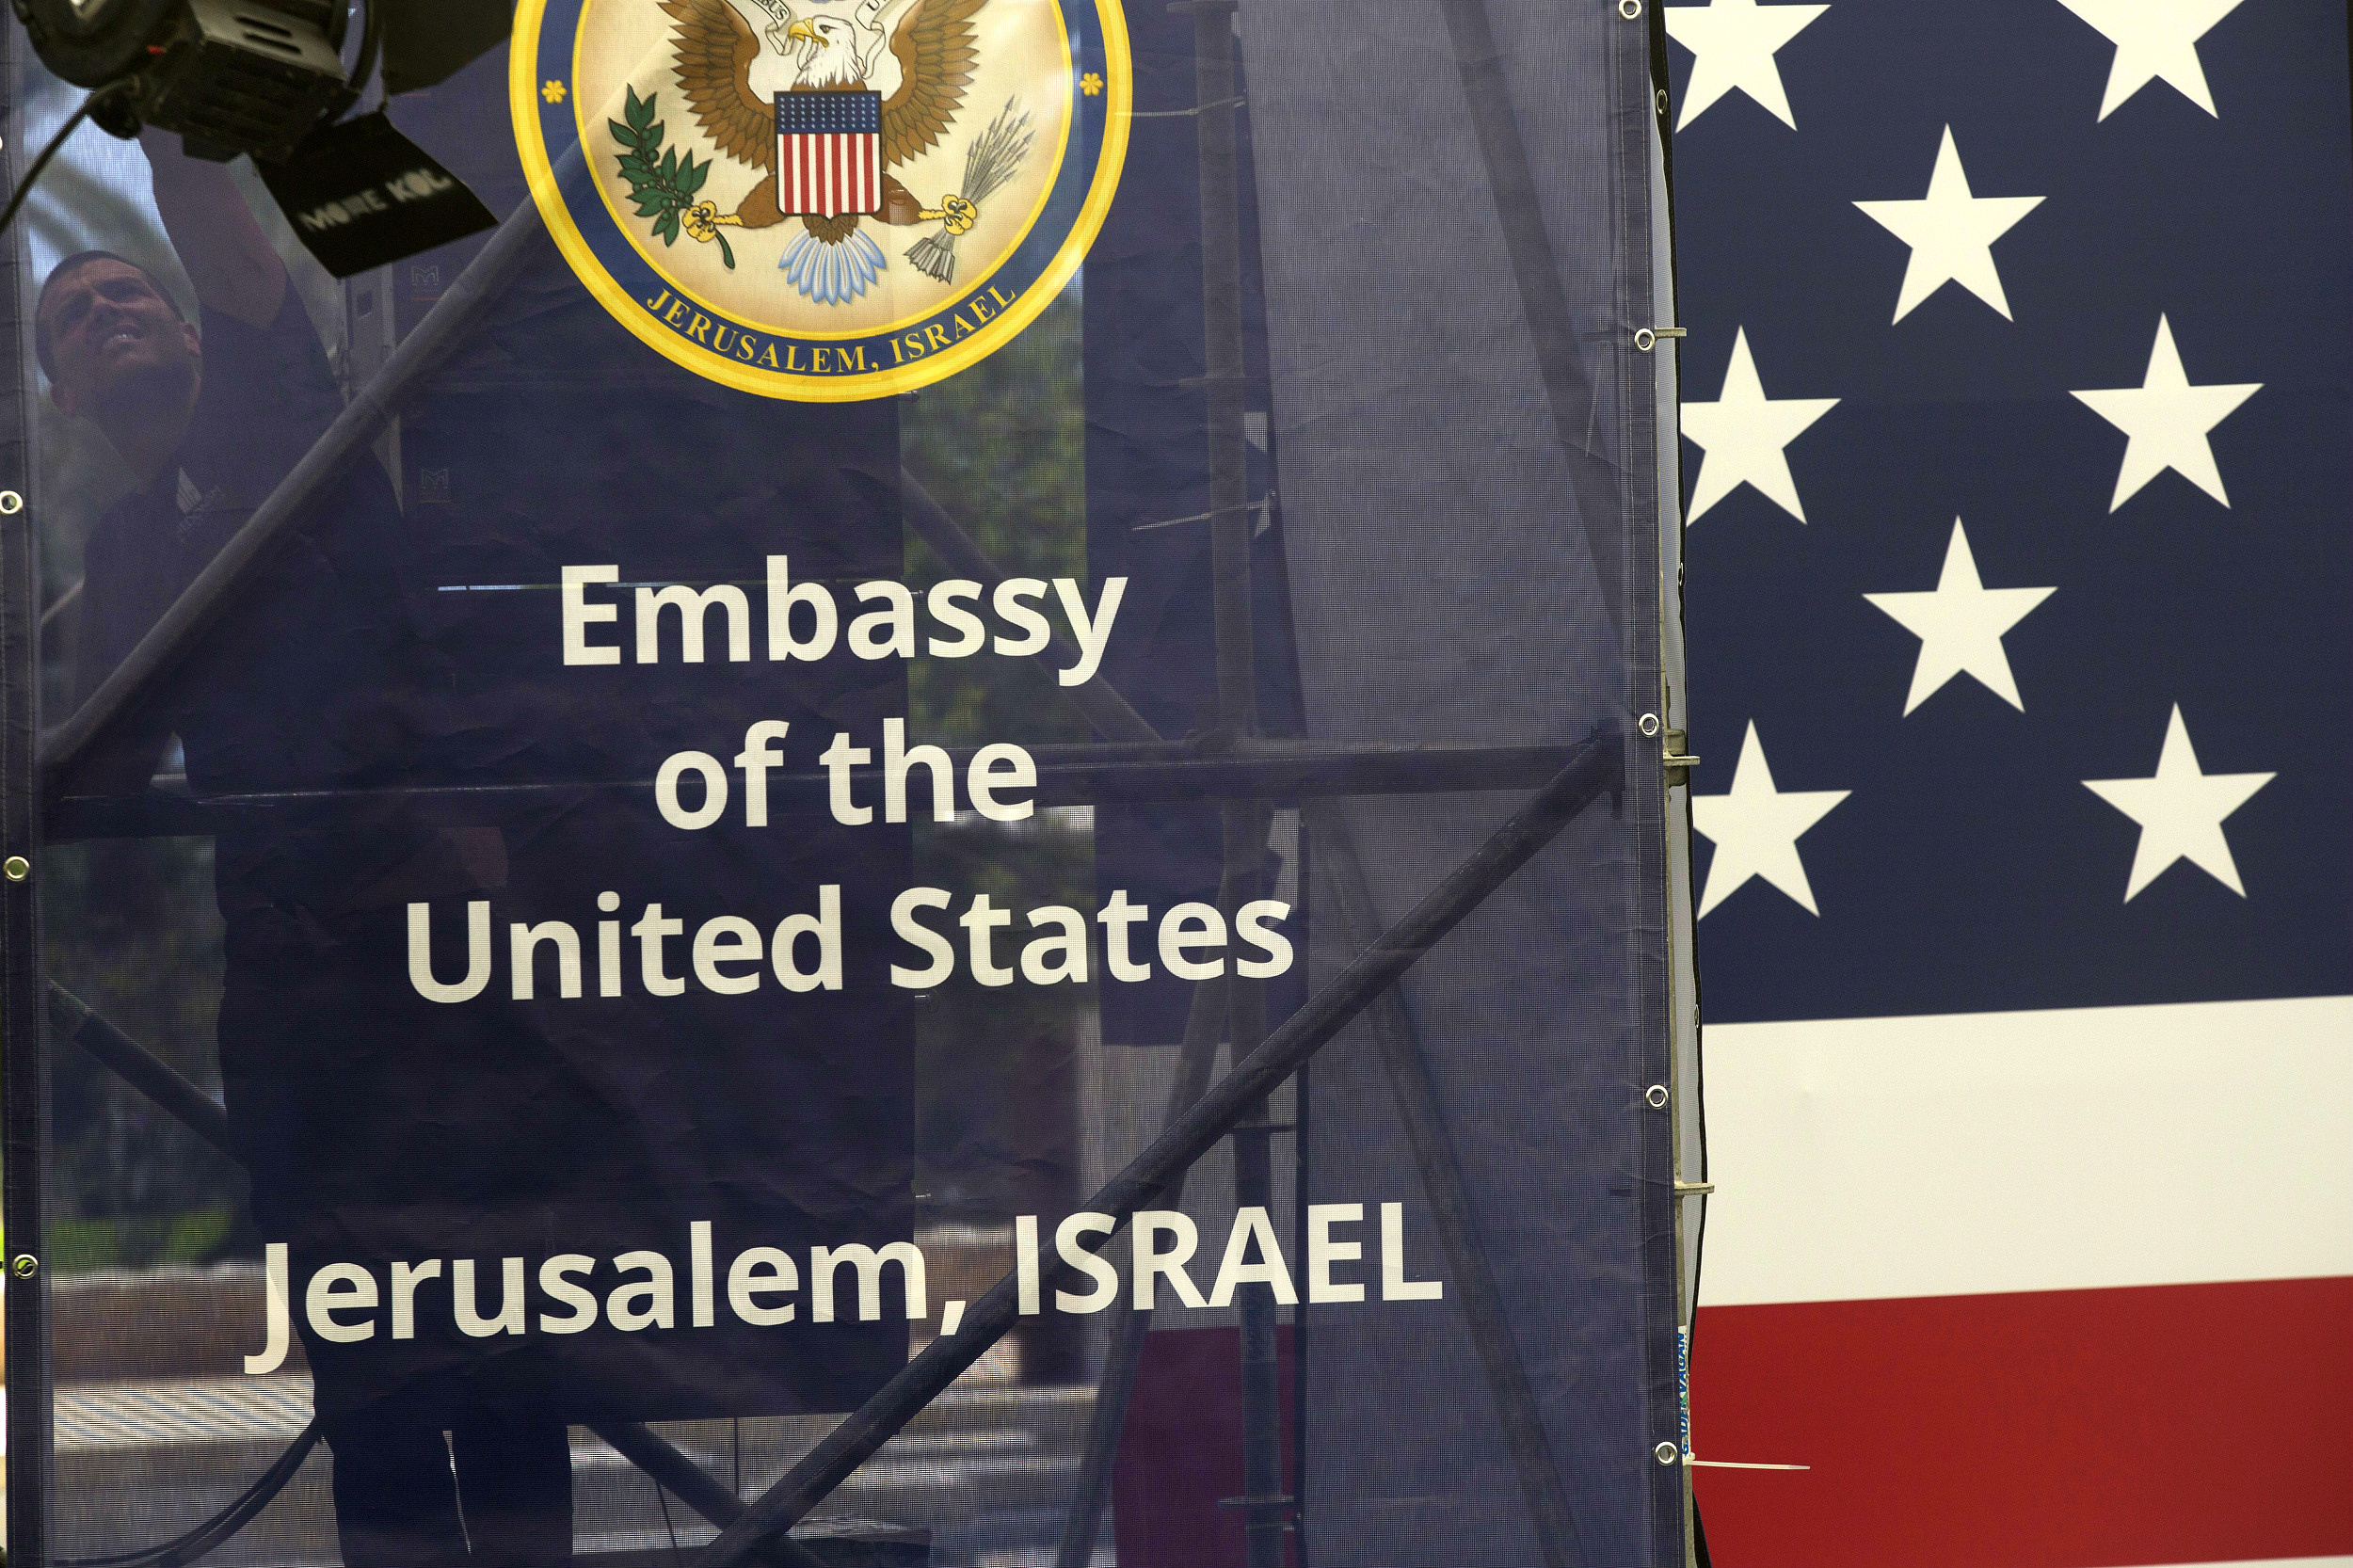 Seven decades of Israeli-Palestinian turmoil to be marked with US embassy move